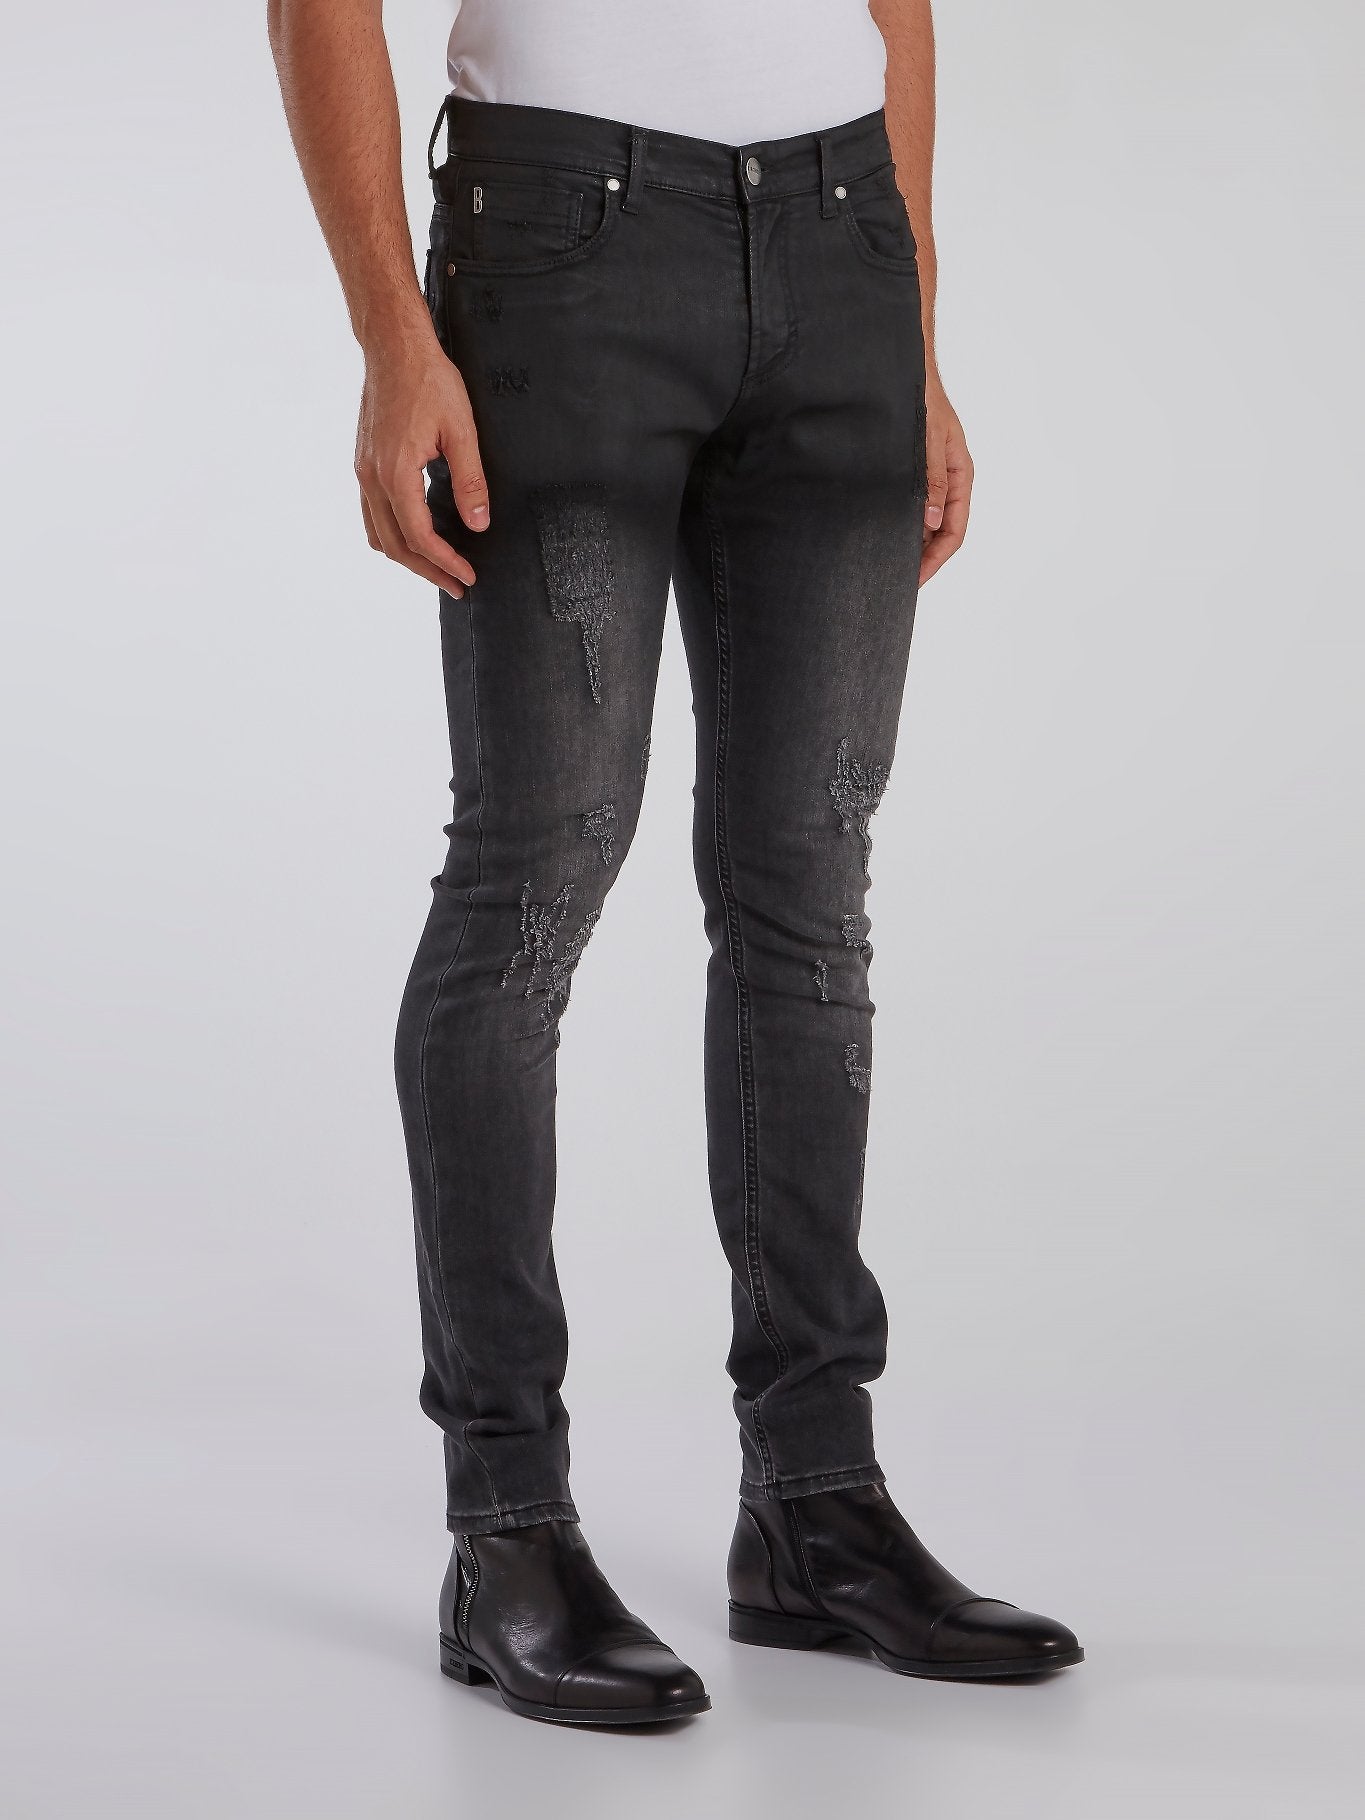 Black Stone Wash Distressed Jeans – Maison-B-More Global Store